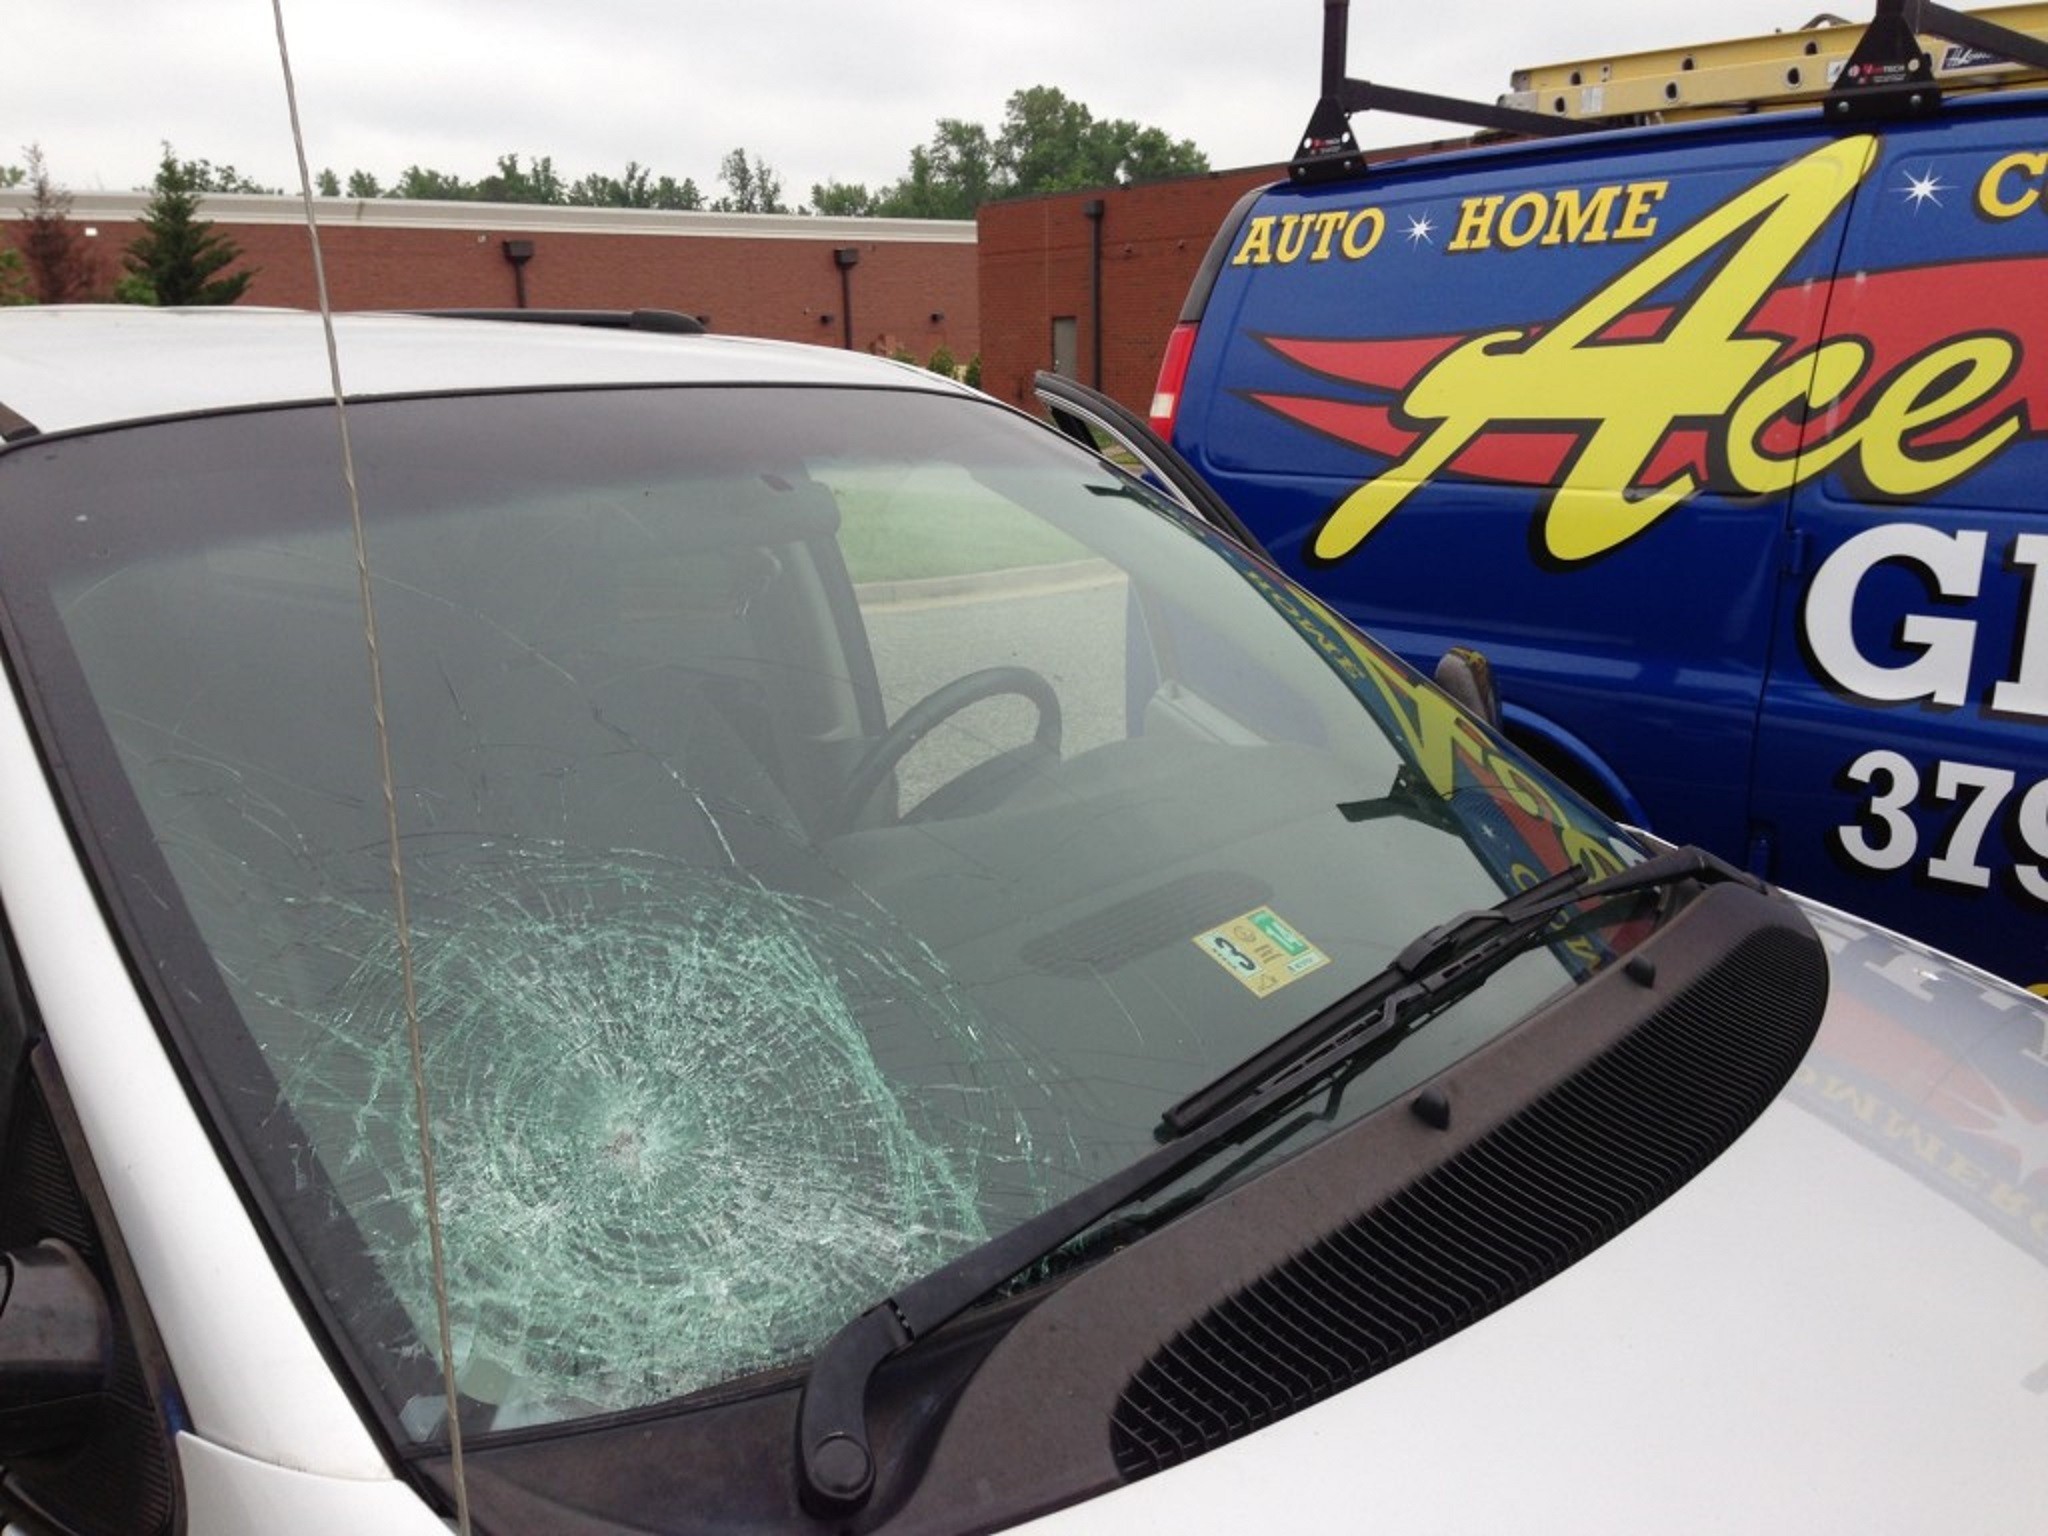 Auto Glass Replacement & Repair - Get An Instant Free Quote Online!